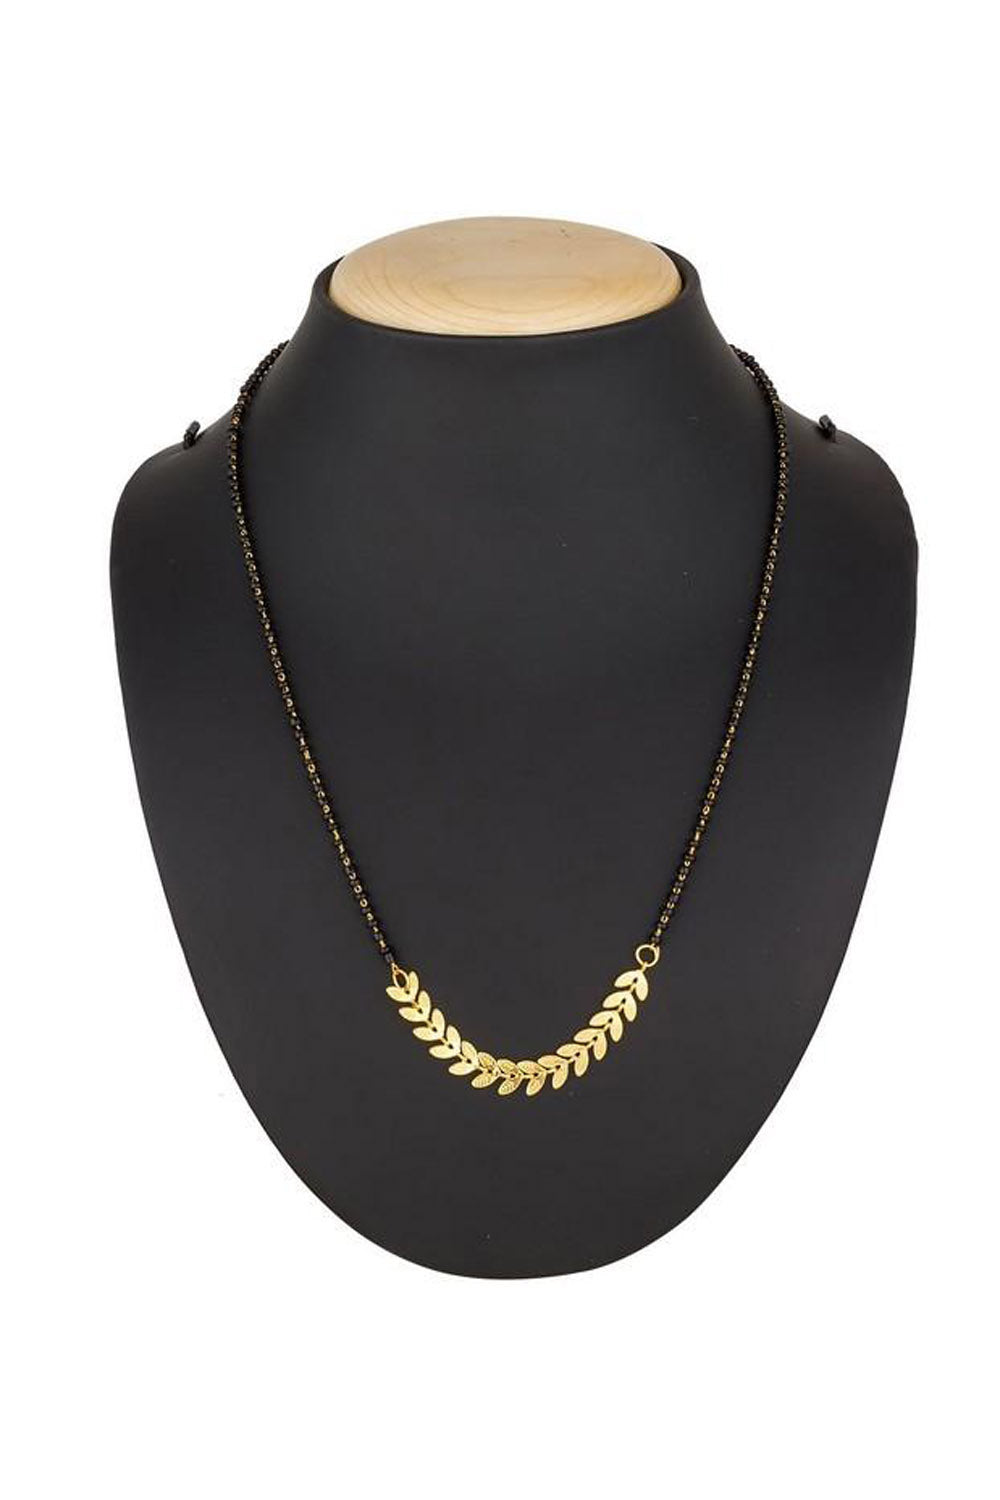 Women's Alloy Mangalsutra in Gold and Black